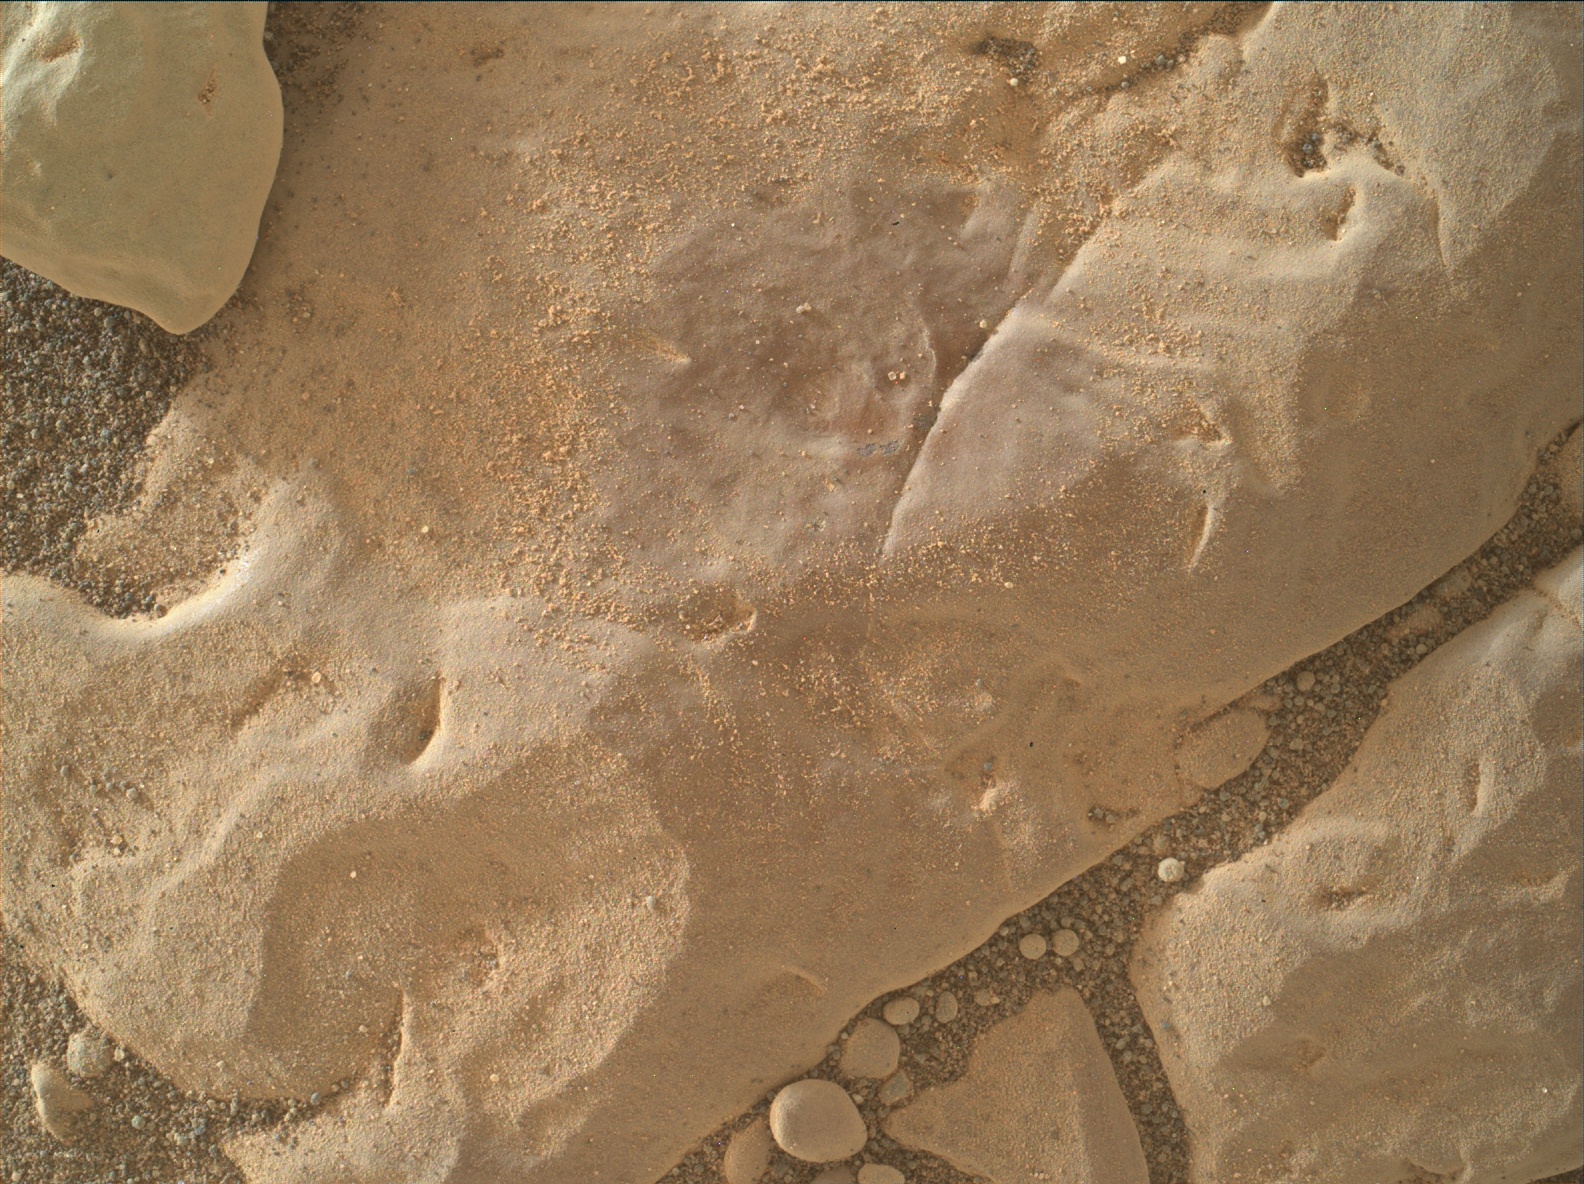 Nasa's Mars rover Curiosity acquired this image using its Mars Hand Lens Imager (MAHLI) on Sol 2432